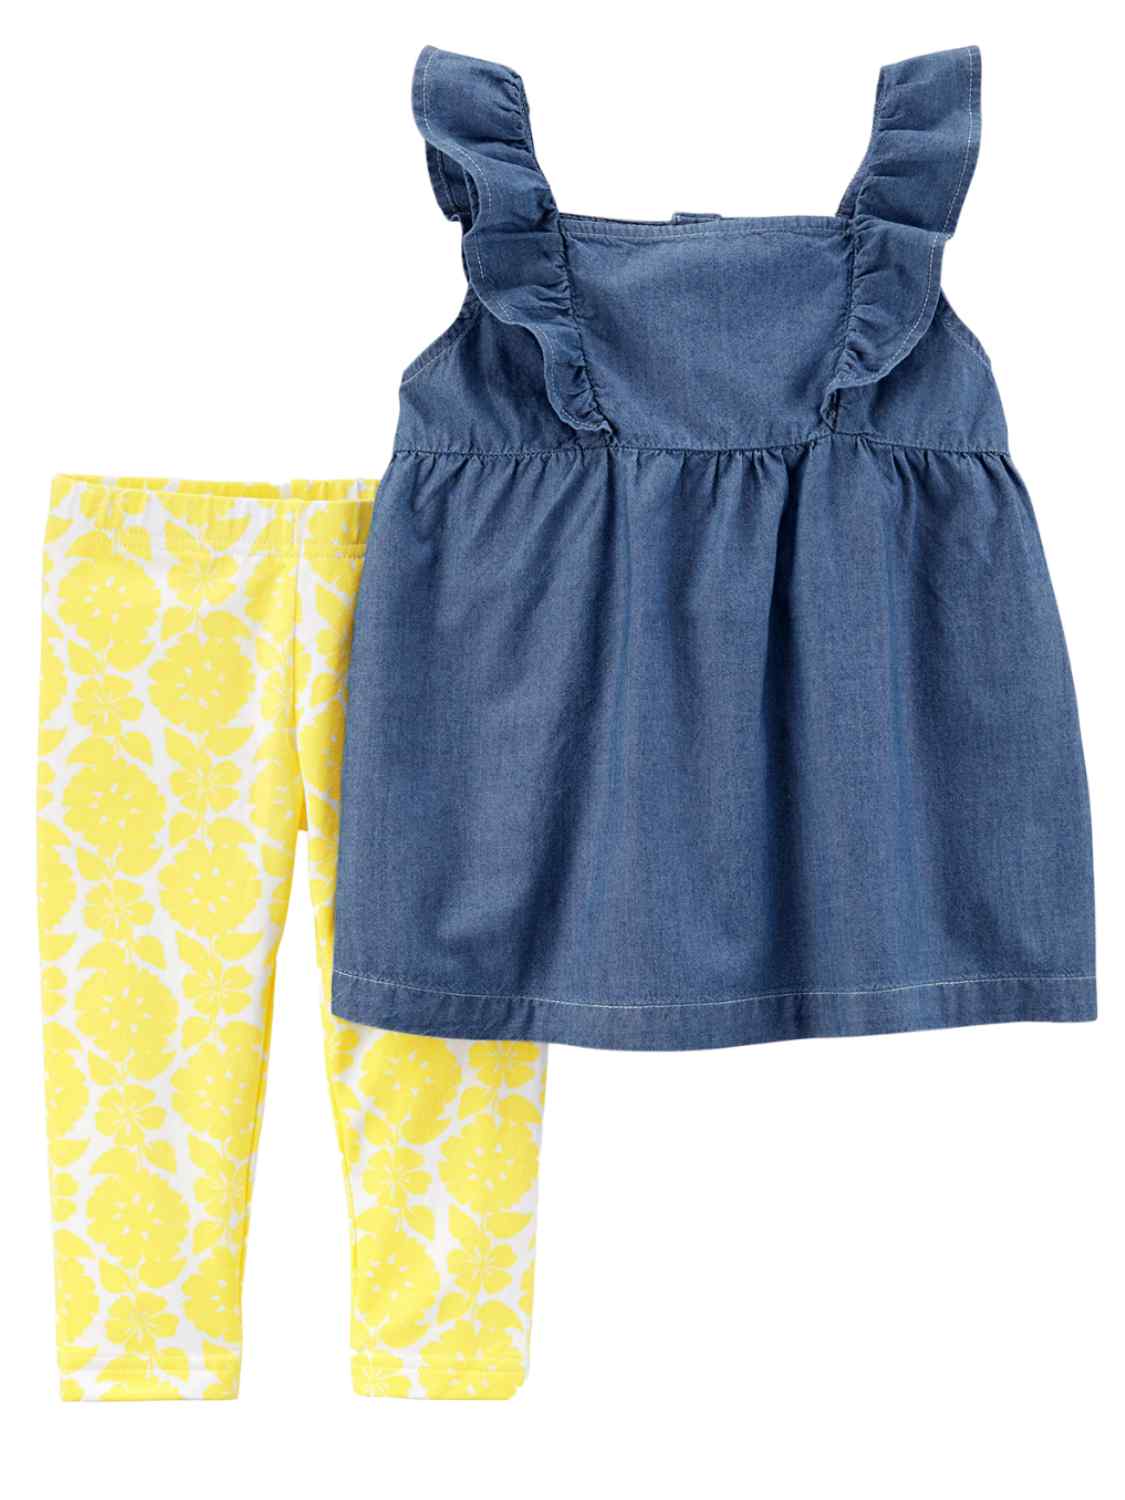 Carter's Carters Infant Girls Baby Outfit Blue Chambray Shirt & Lemon Yellow Leggings